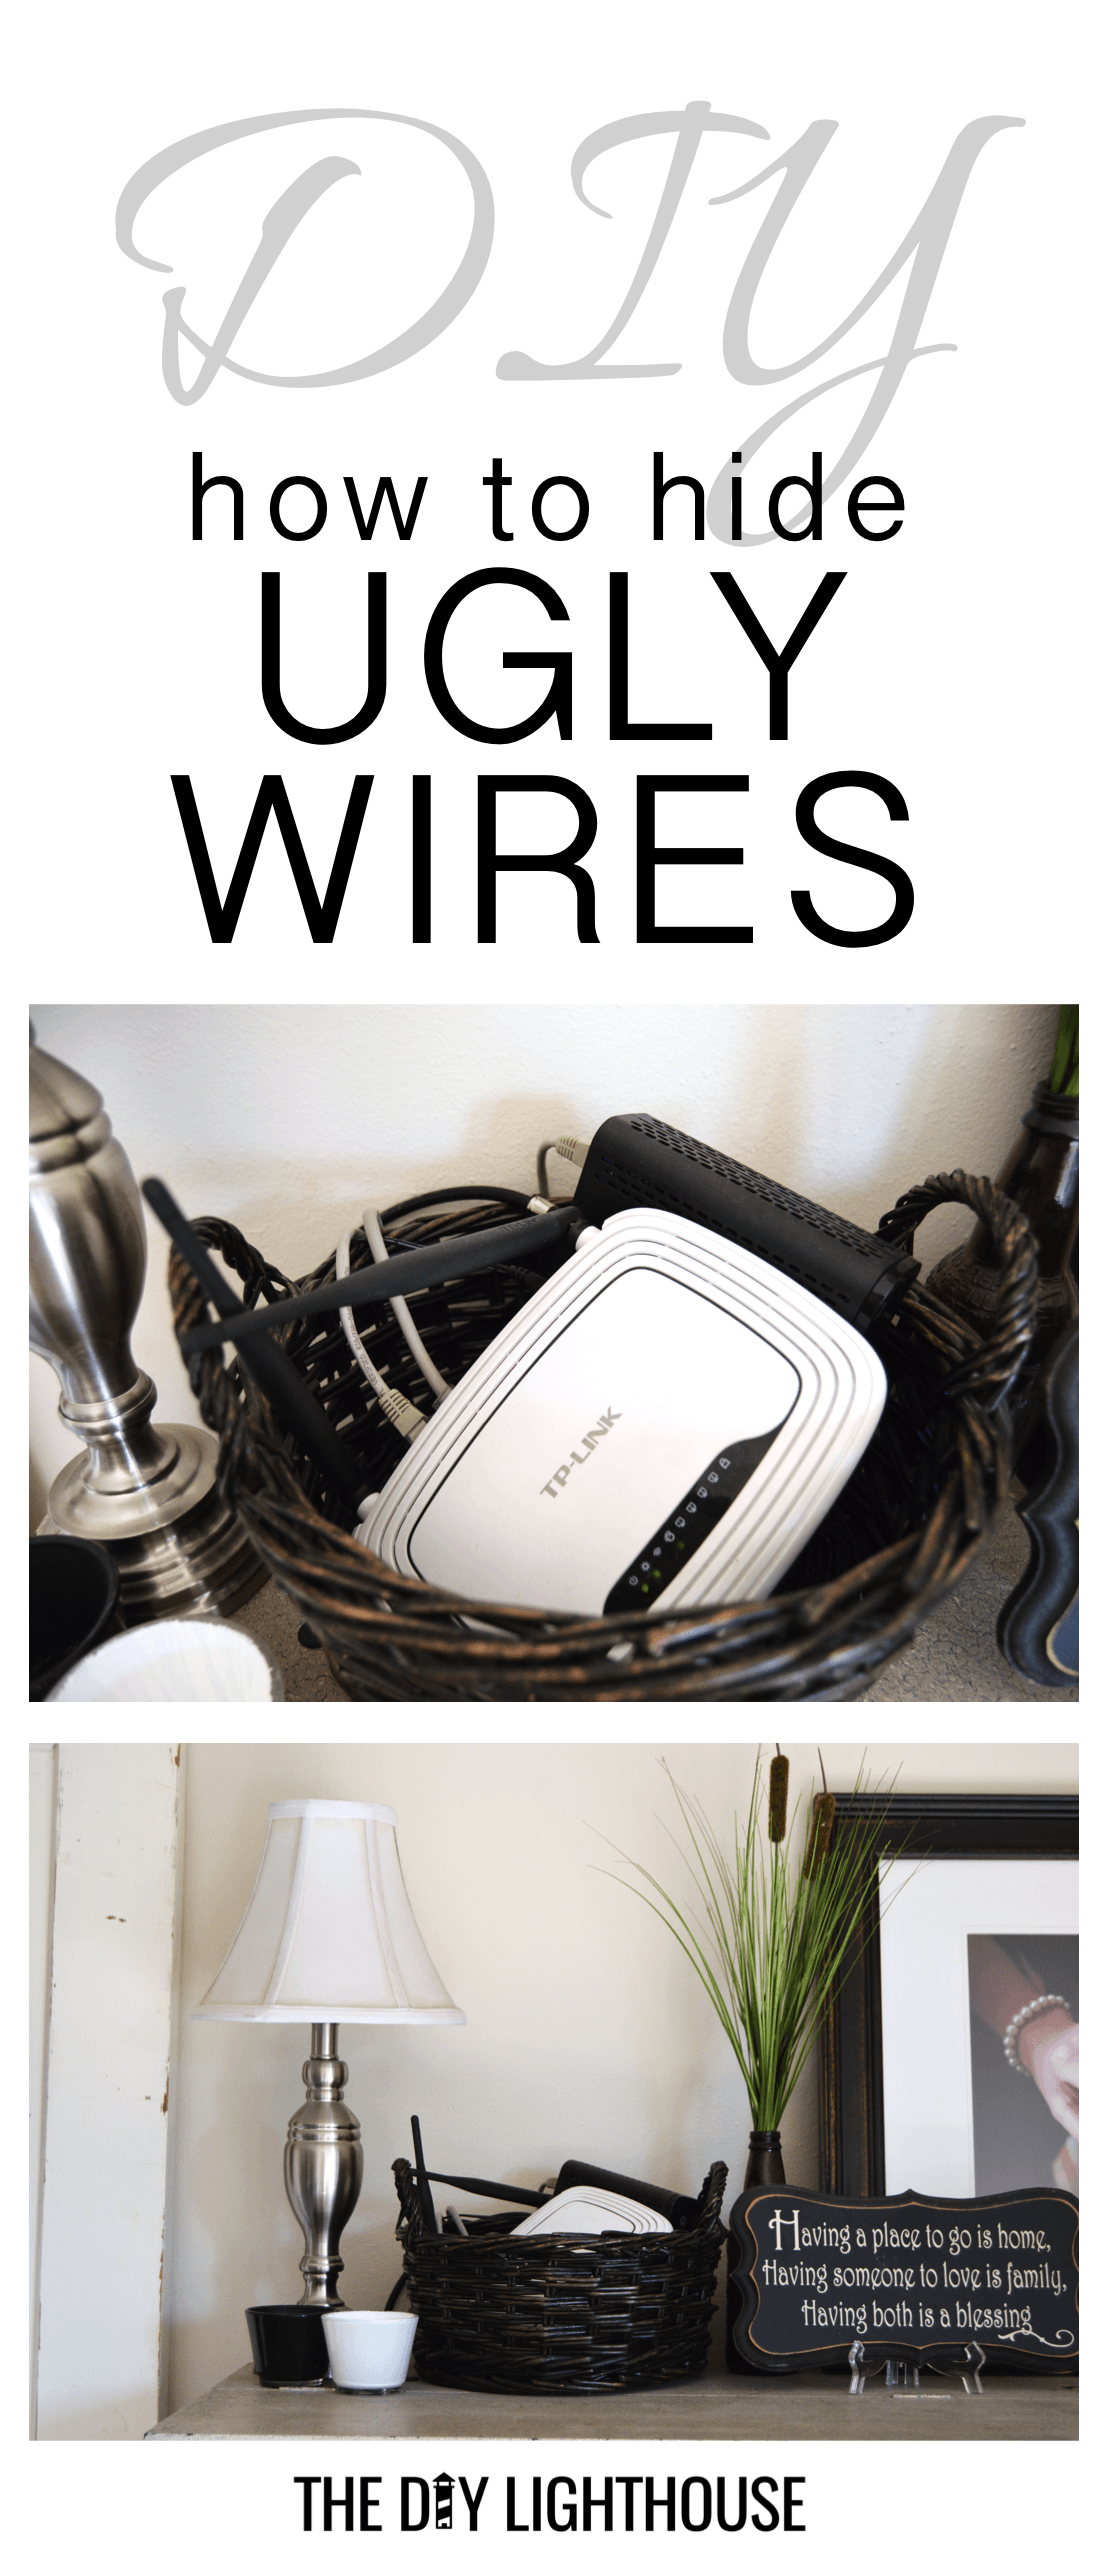 https://thediylighthouse.com/wp-content/uploads/2015/11/hide-ugly-wires-pinterest.png